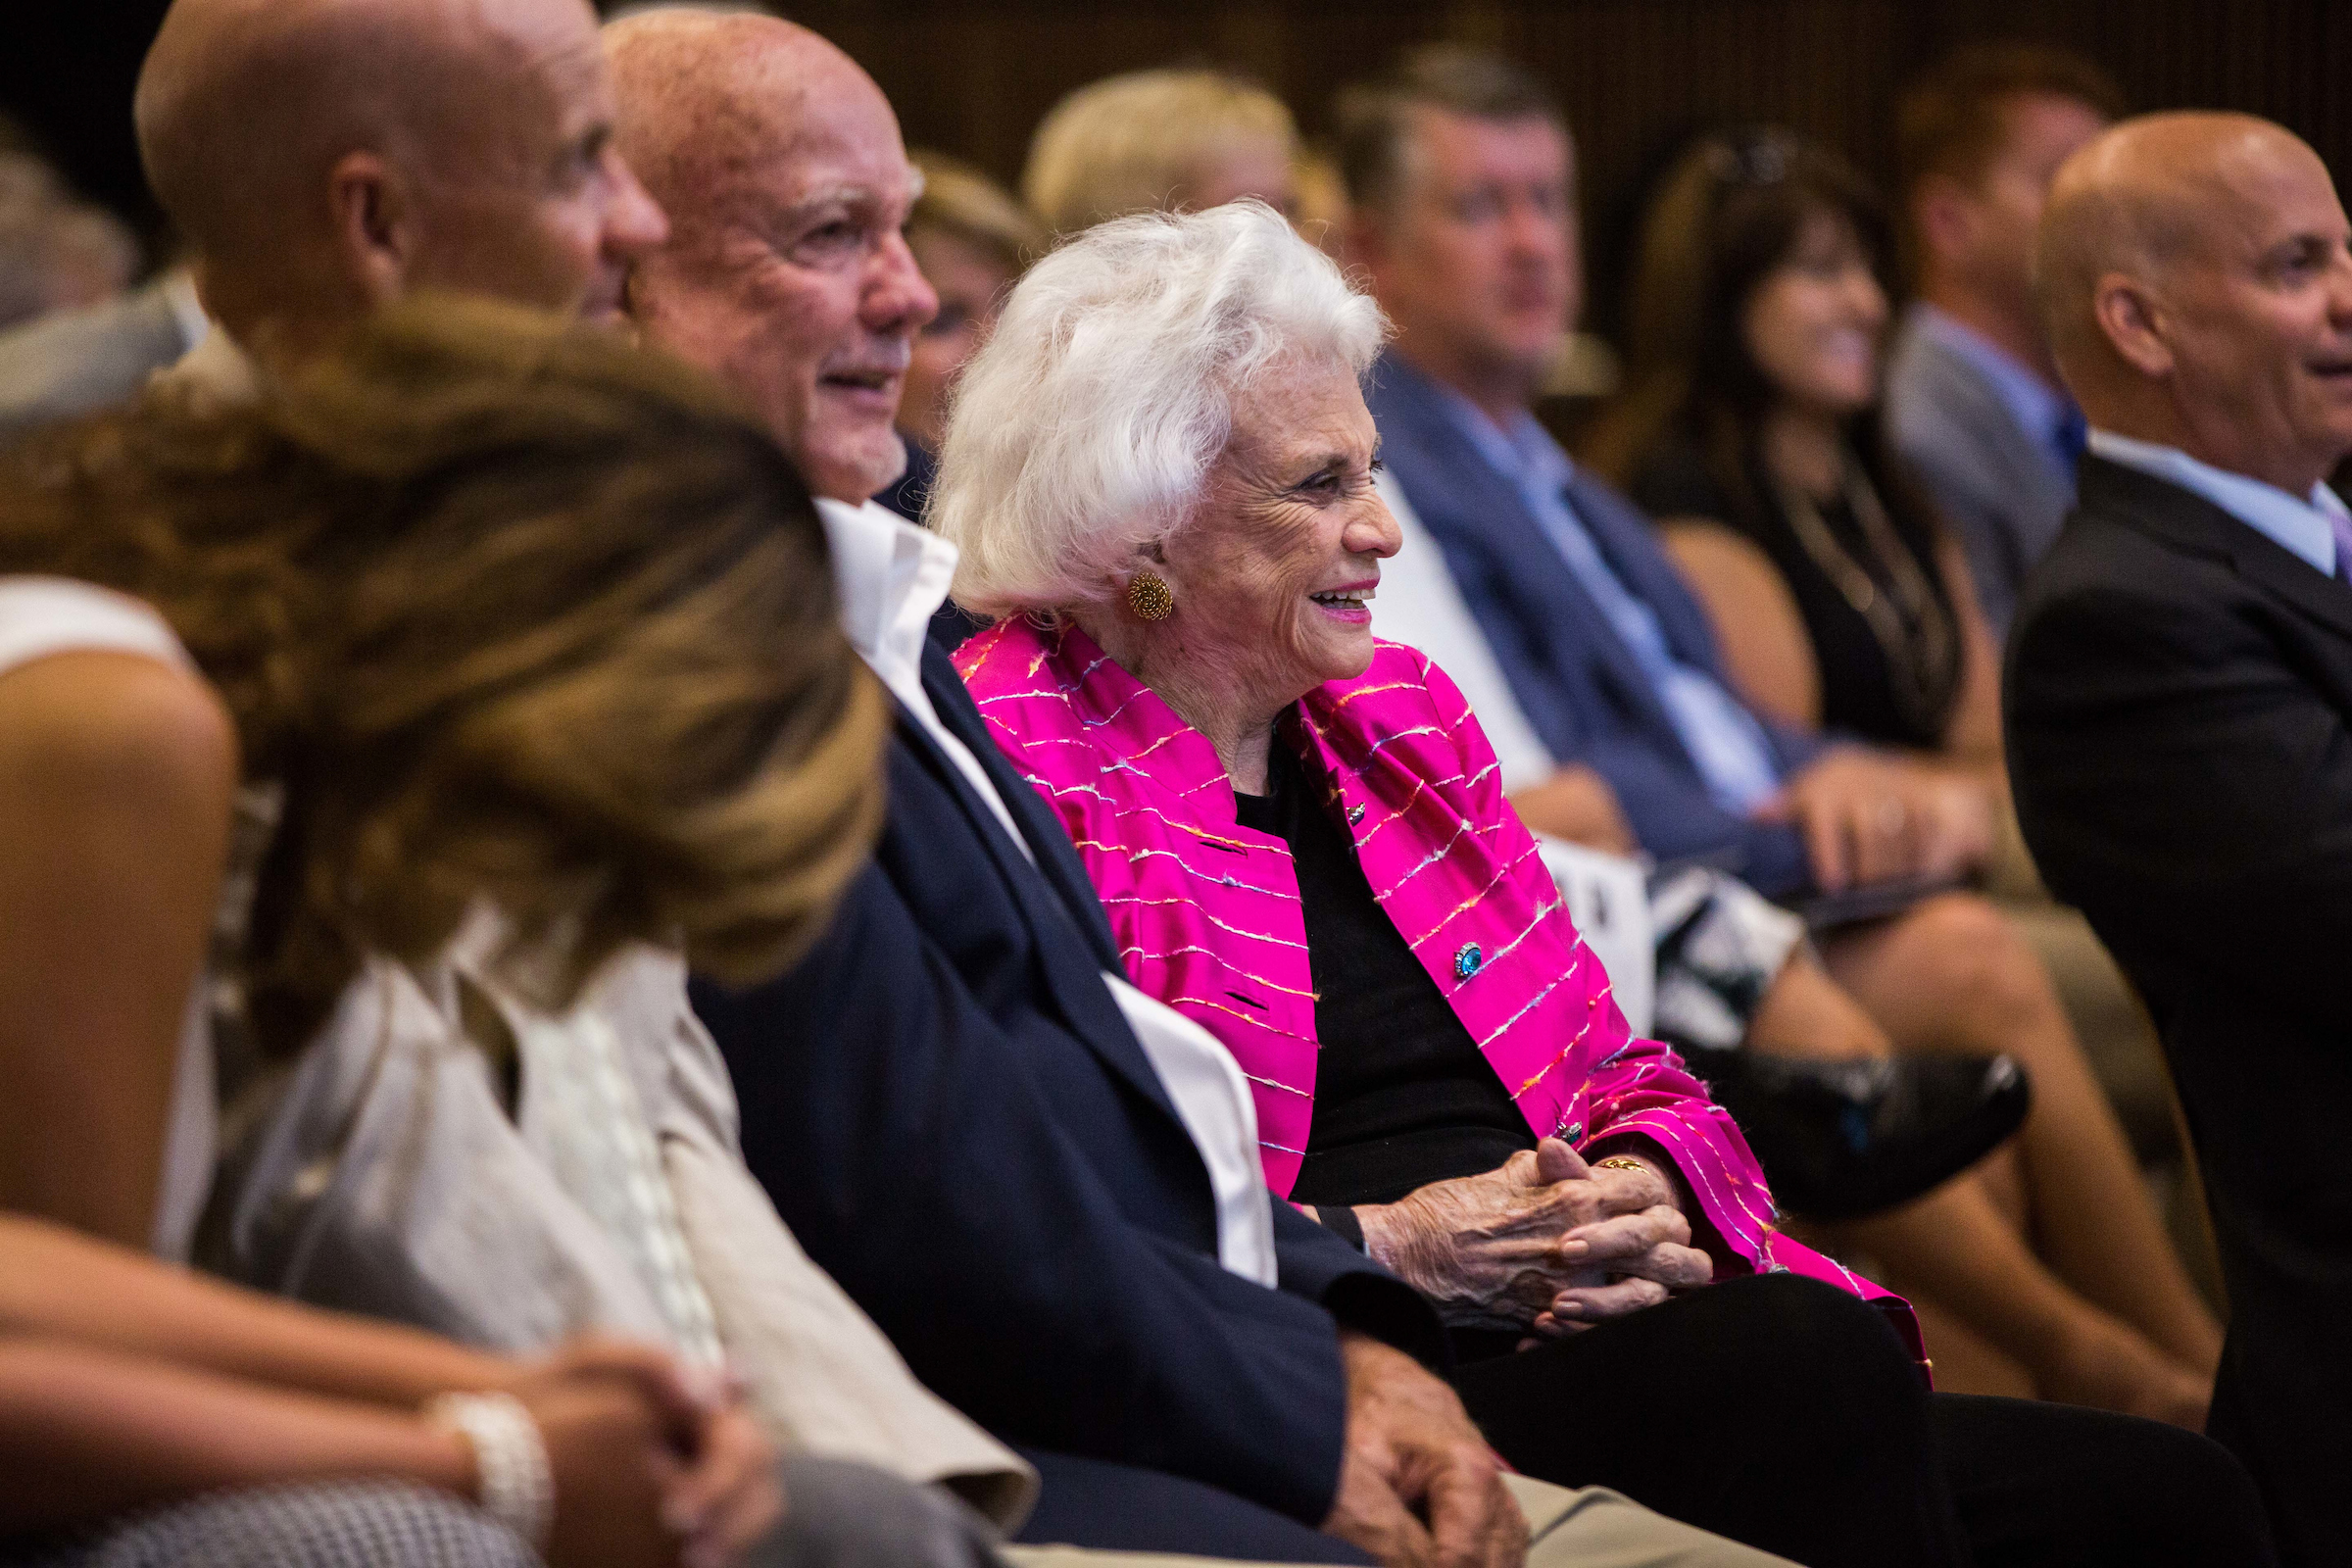 Sandra Day O'Connor in audience, smiling